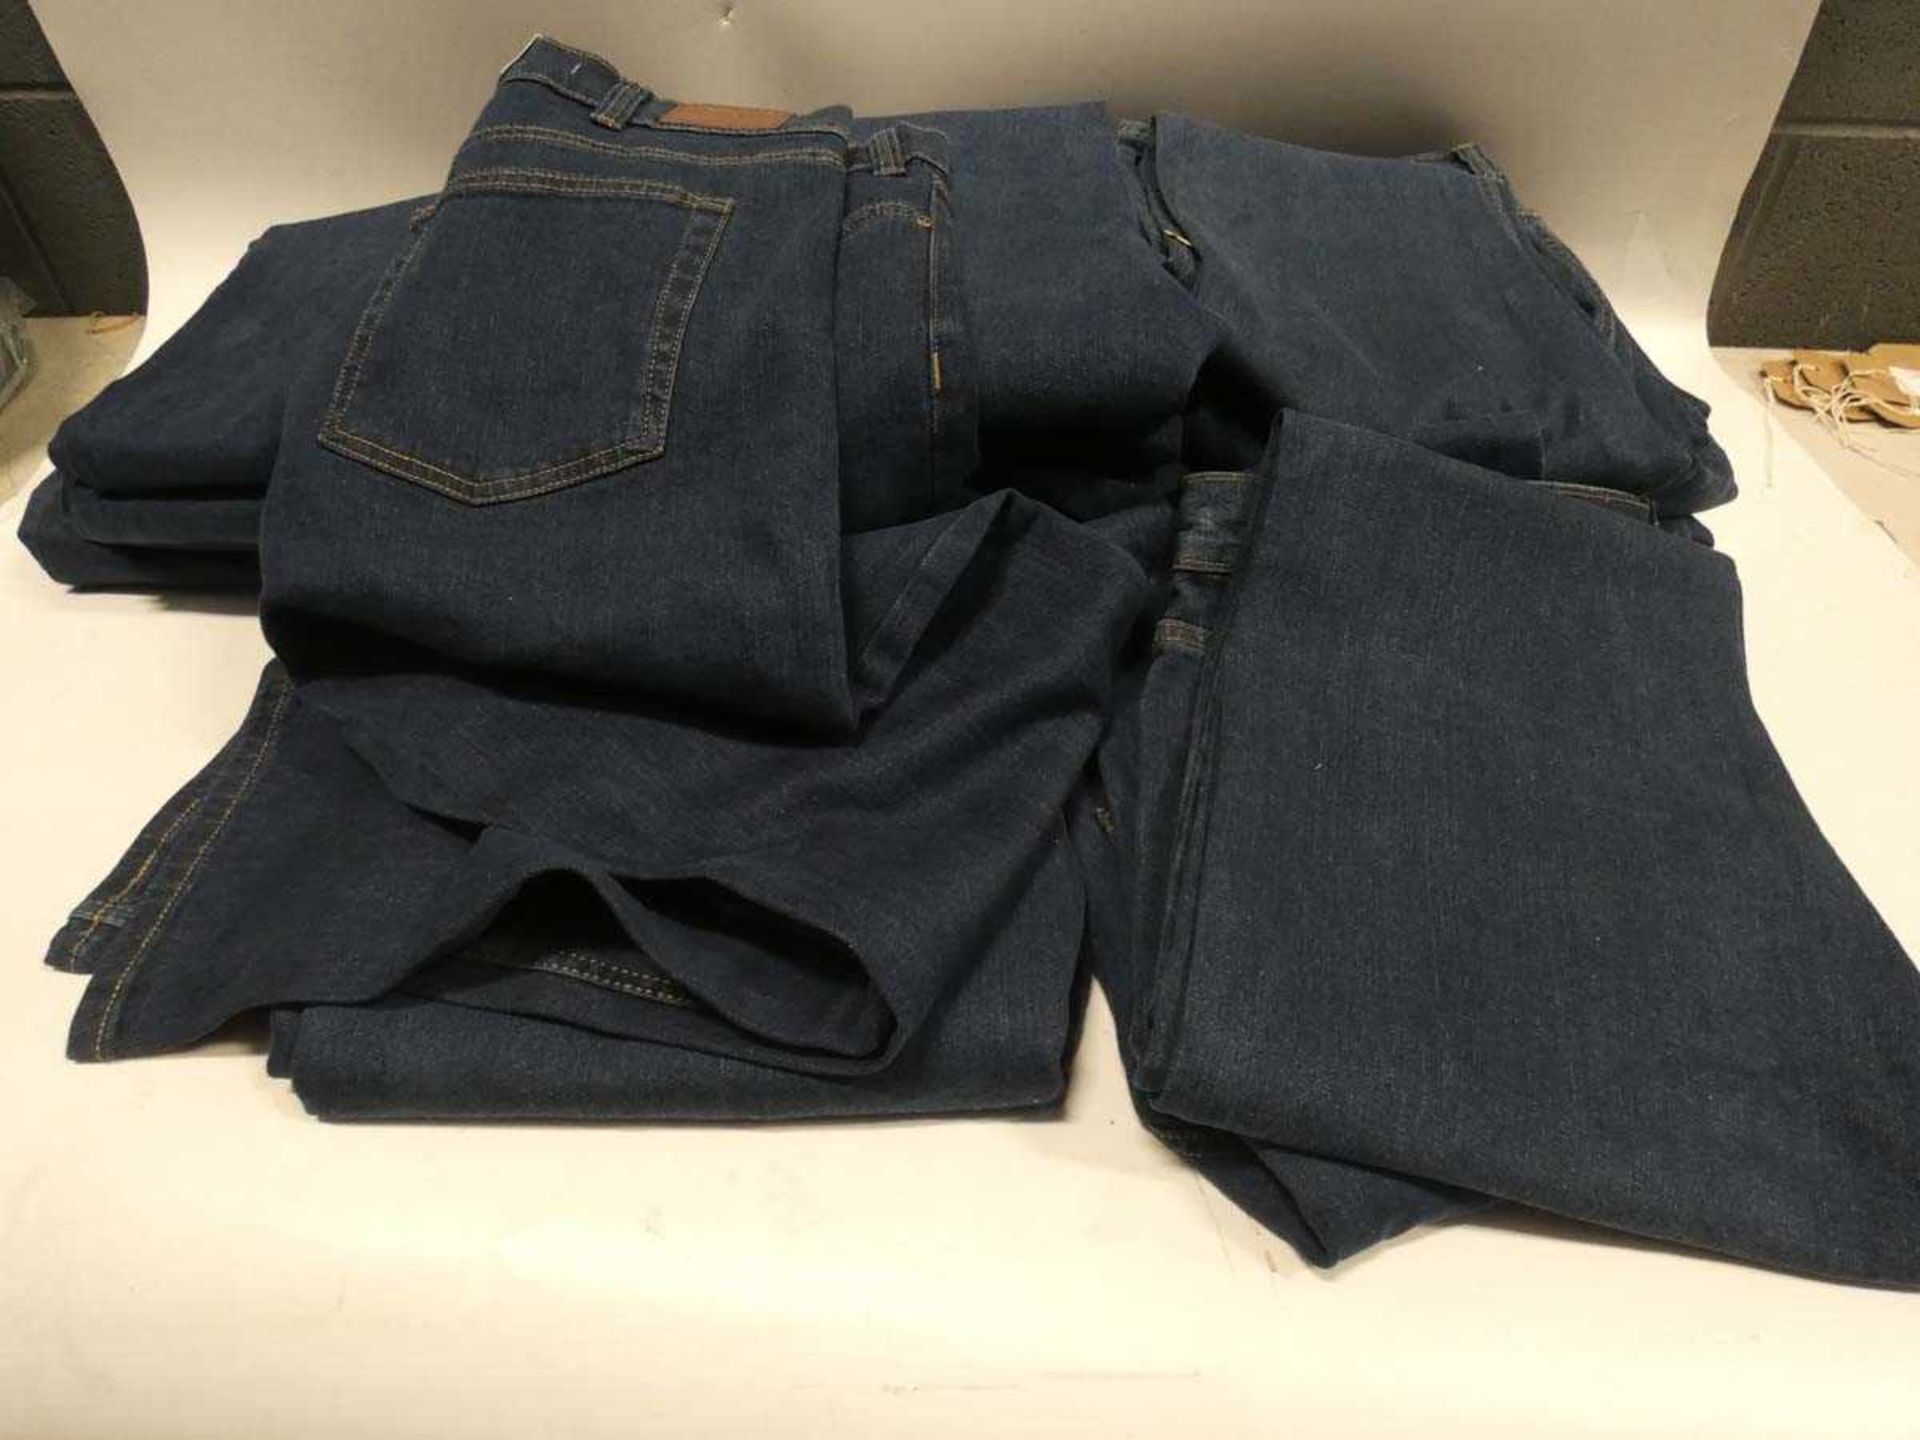 +VAT Bag of Kirkland jeans sizes vary from 38/32" and 40/30" approx. 20 pairs